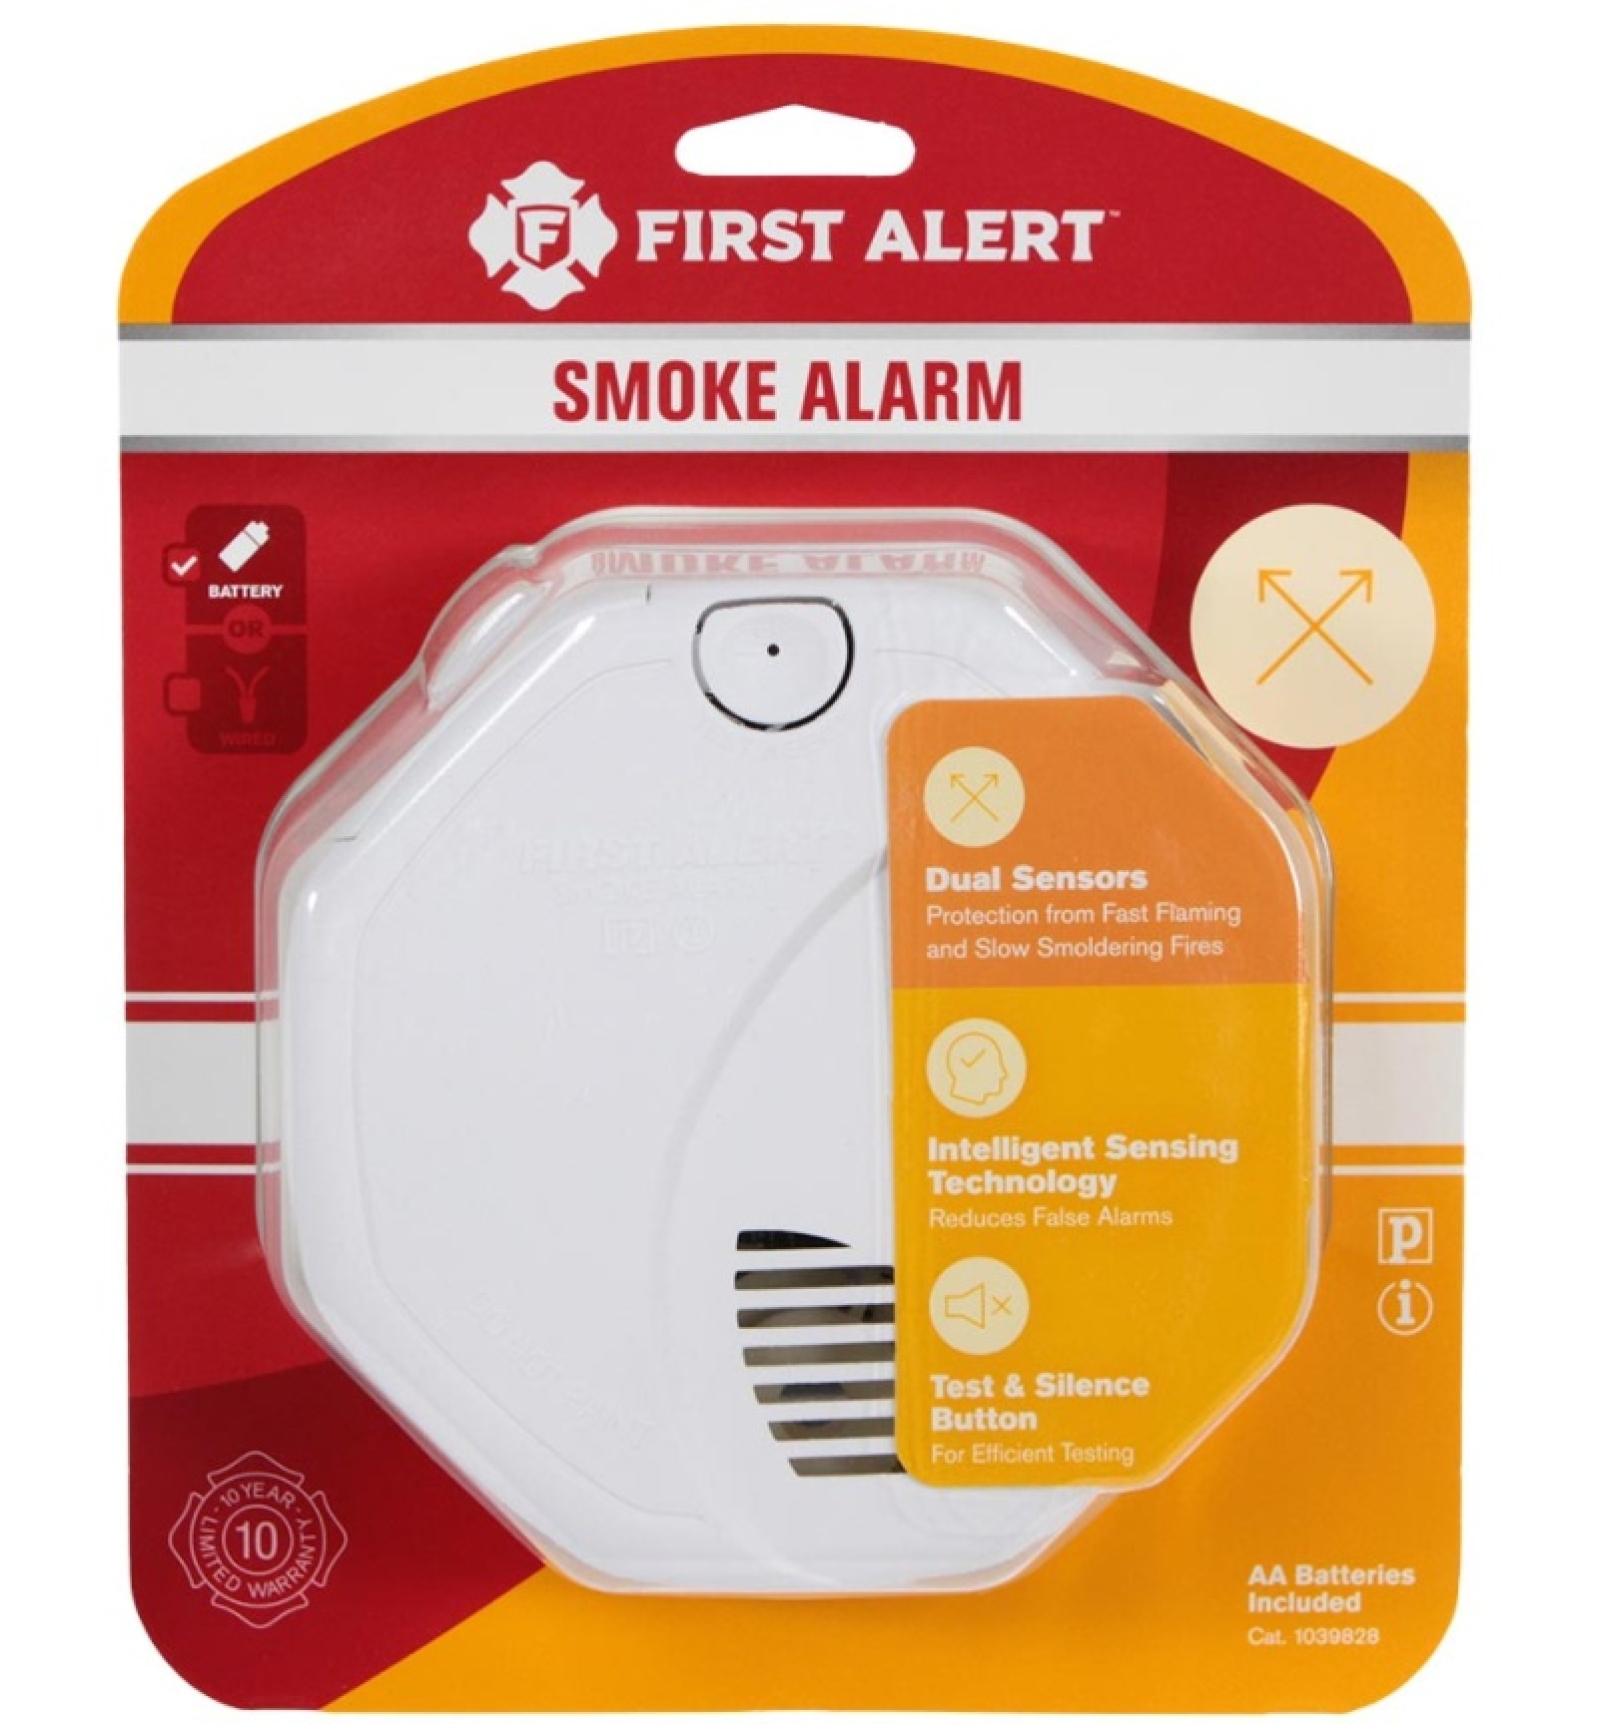 First Alert Smoke Alarm with Smart Sensing Technology and Nuisance Resistance